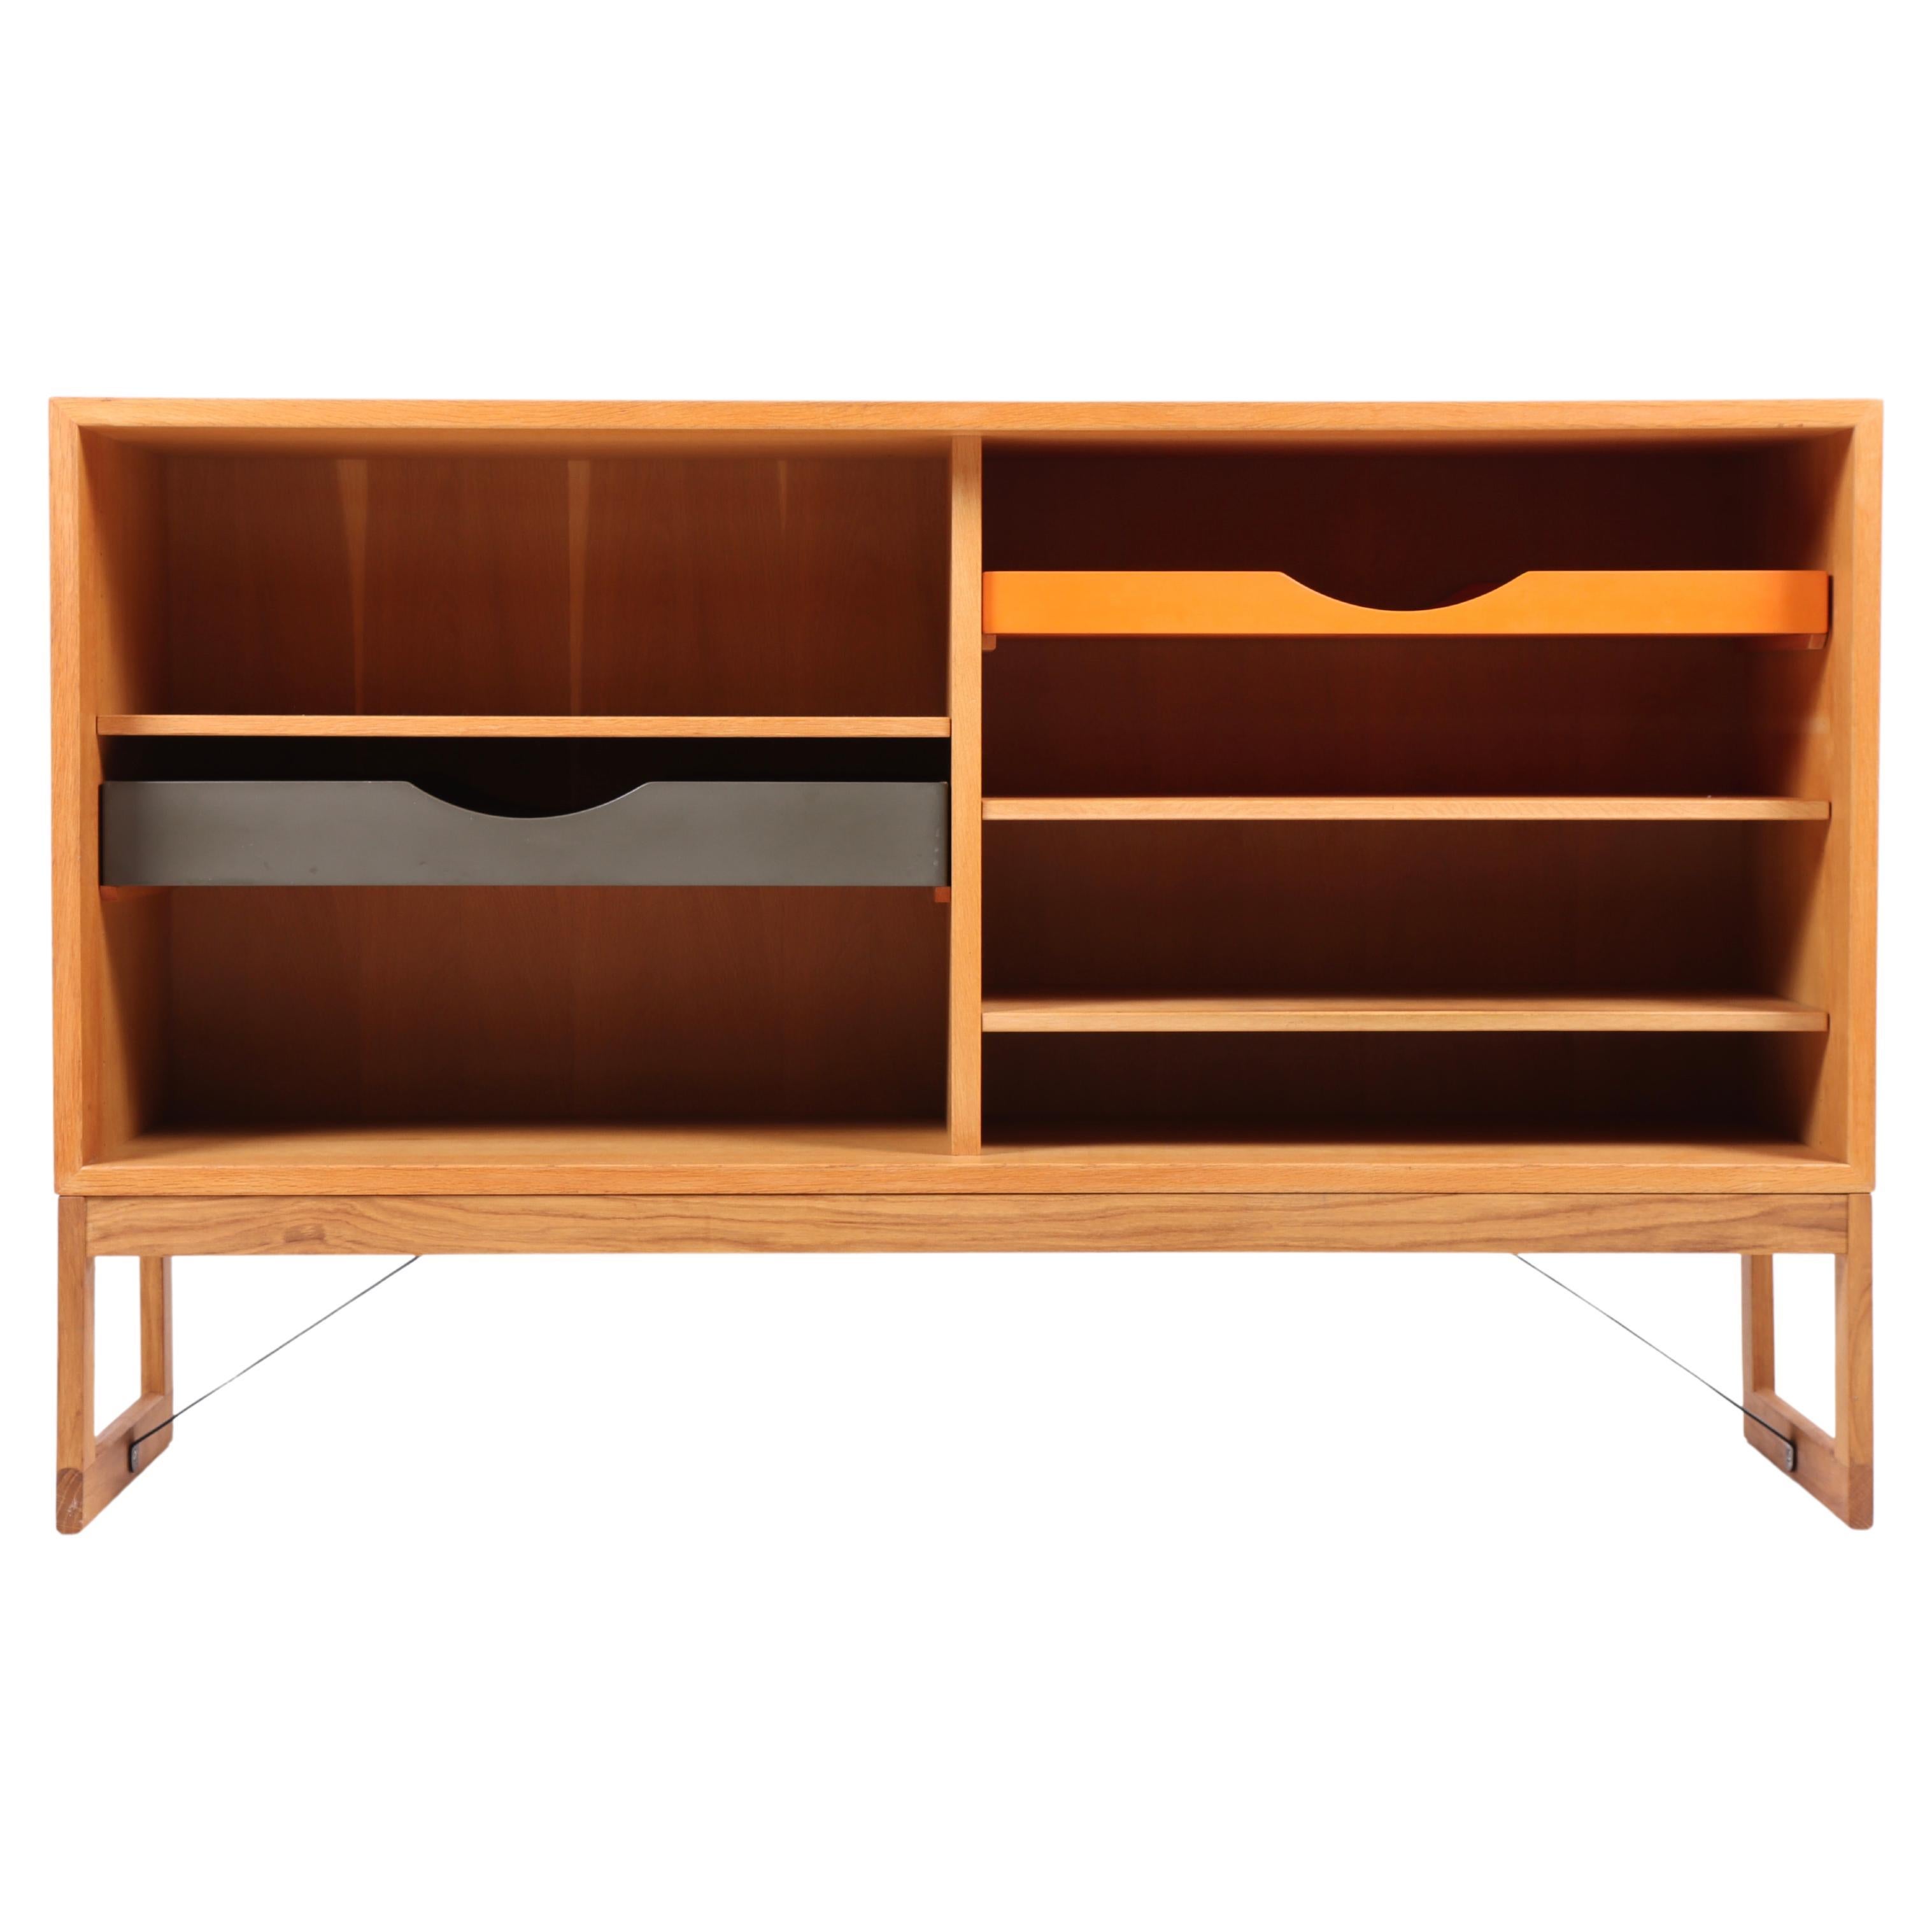 Low Midcentury Bookcase, Oak with Colored Drawers by Børge Mogensen For Sale